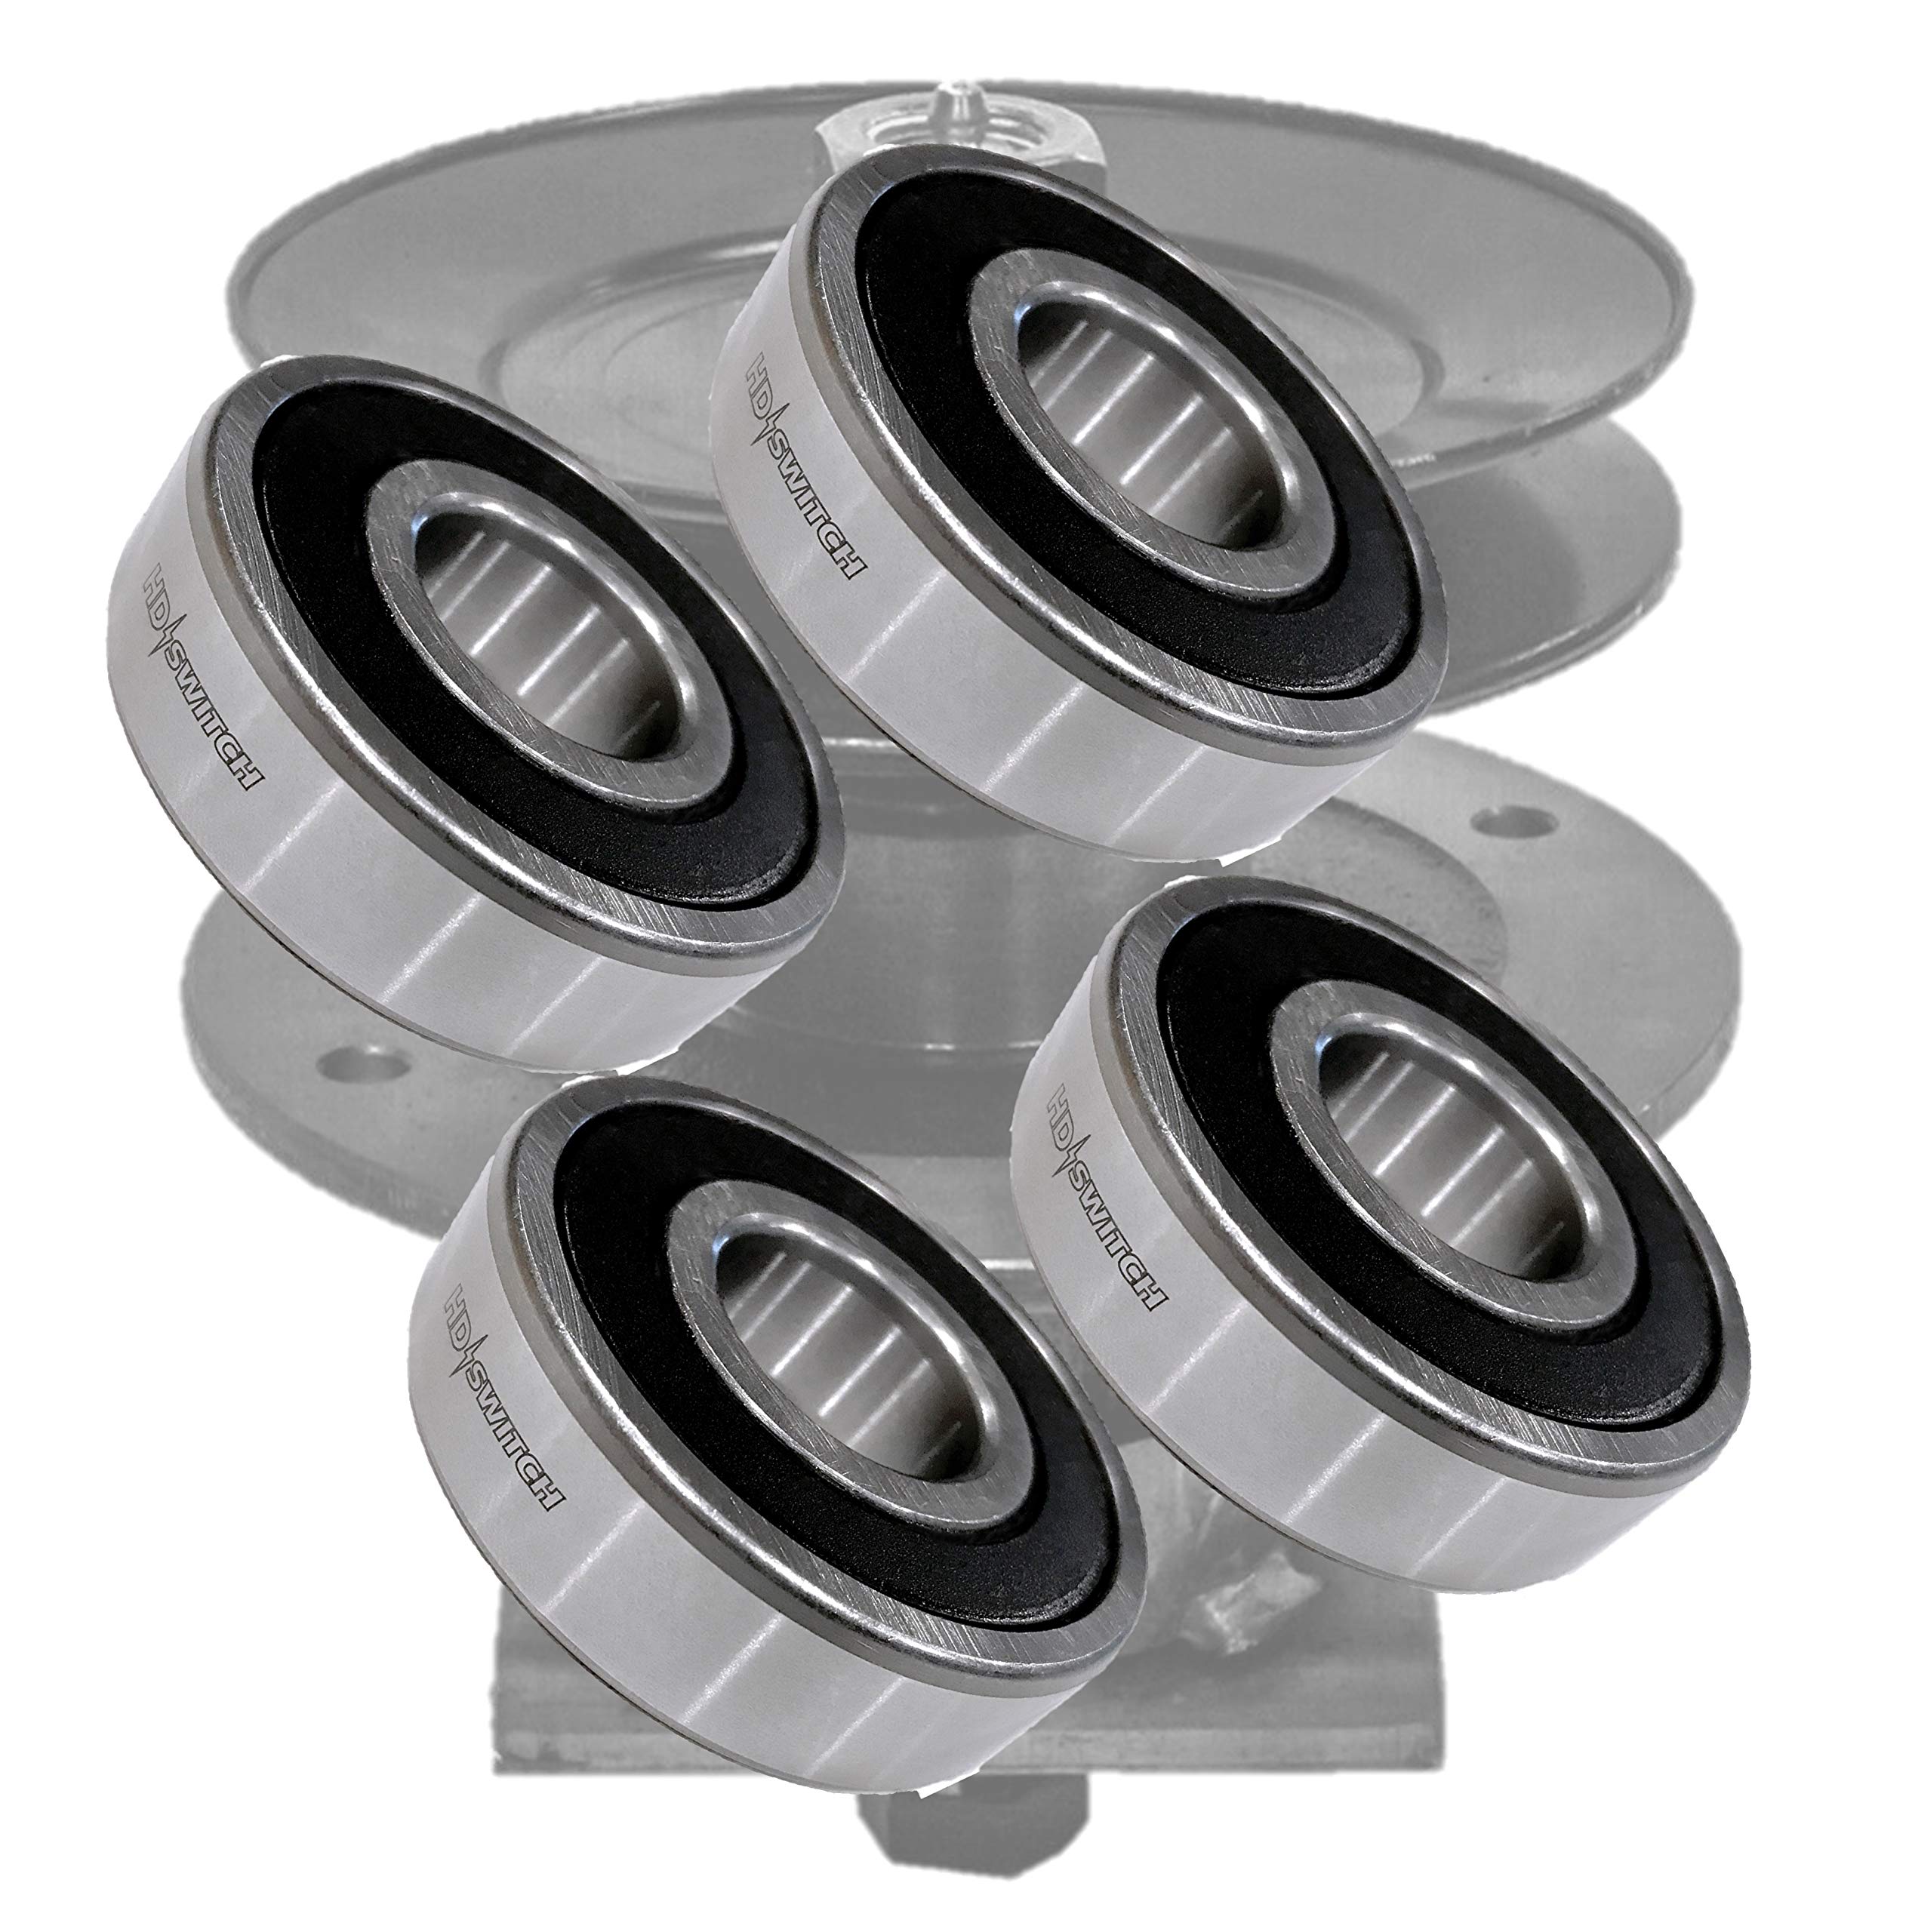 HD Switch (4 Pack) Deck Spindle Rebuild Bearing Replaces Toro 100-3977, 99-3934, 105-6173, 67-7590, 100-3974, 54-0010, Z147, Z148, Z150